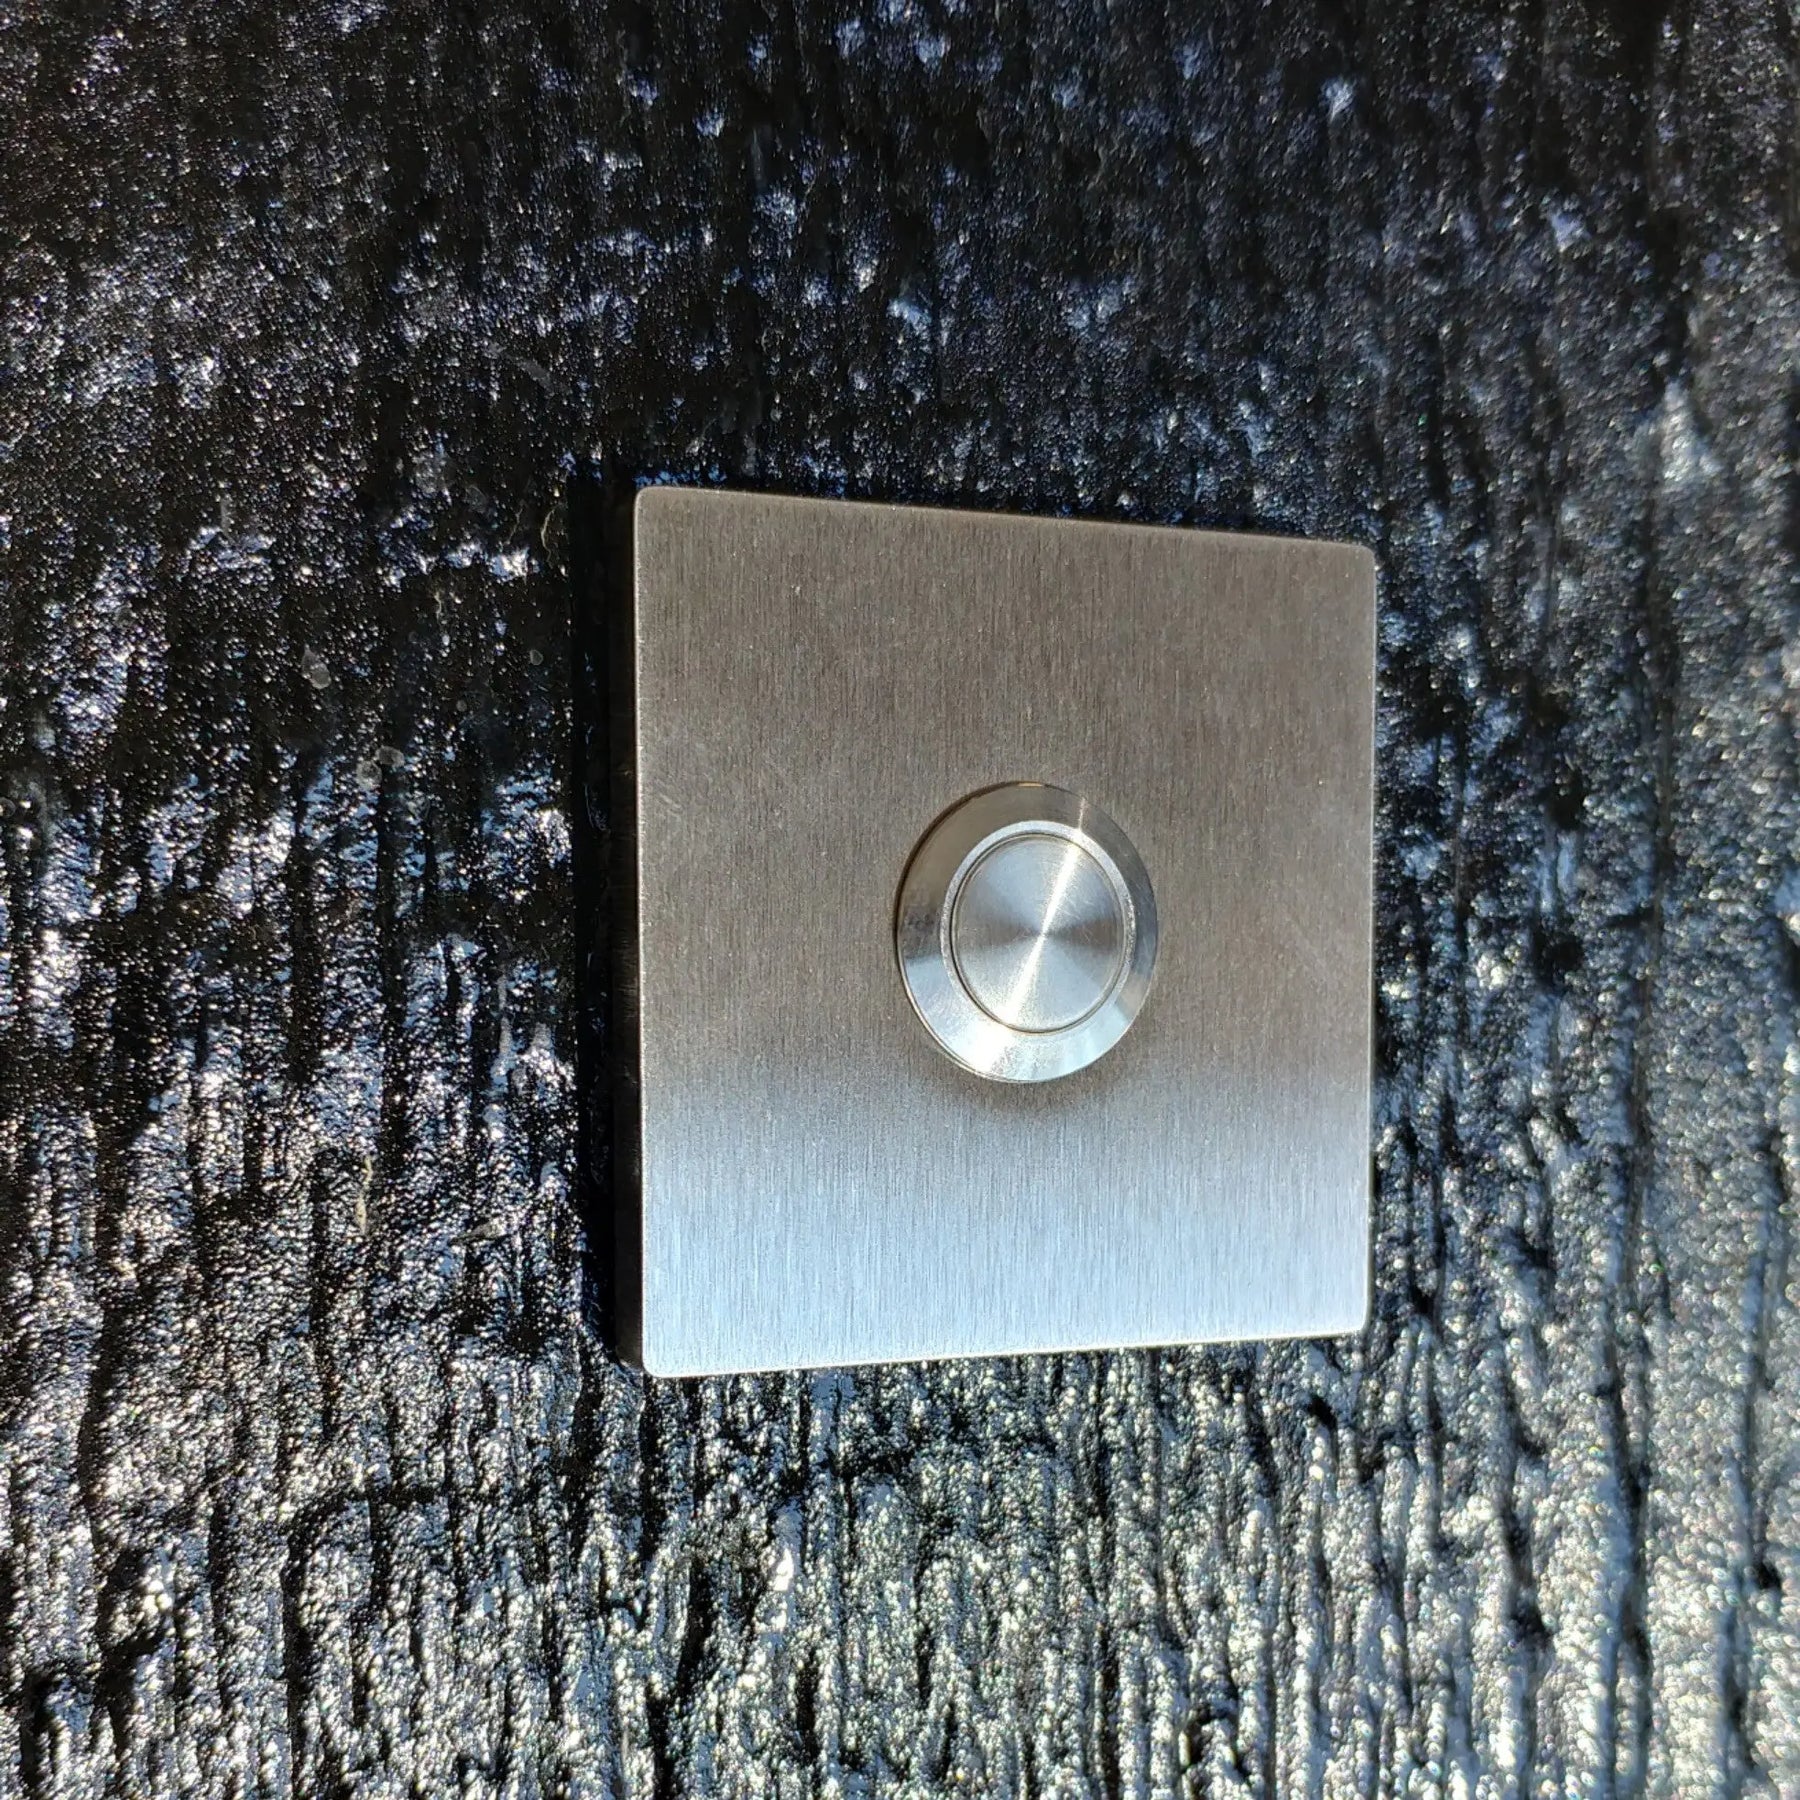 Stainless Steel Square Doorbell, Flush - No Screw Design Expressions LTD